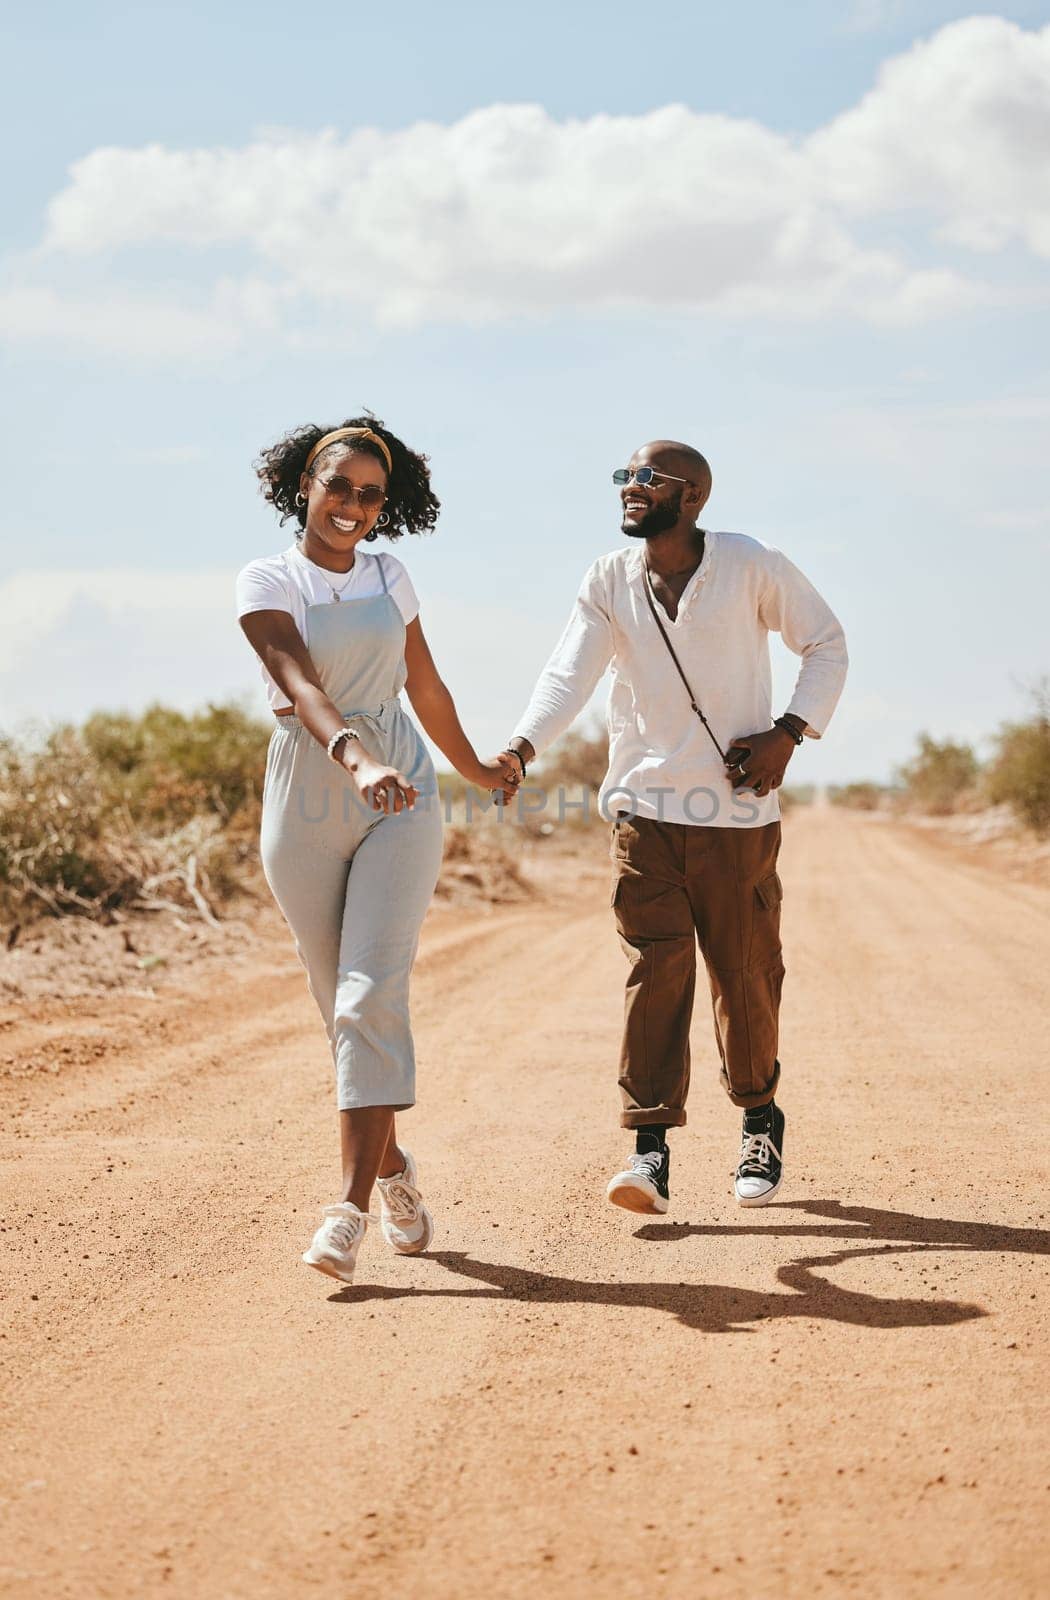 Black couple on road trip, happy people walking on vacation and Los Angeles festival travel. Summer holiday, trendy fashion lifestyle and love happiness on happy outdoor desert adventure together.